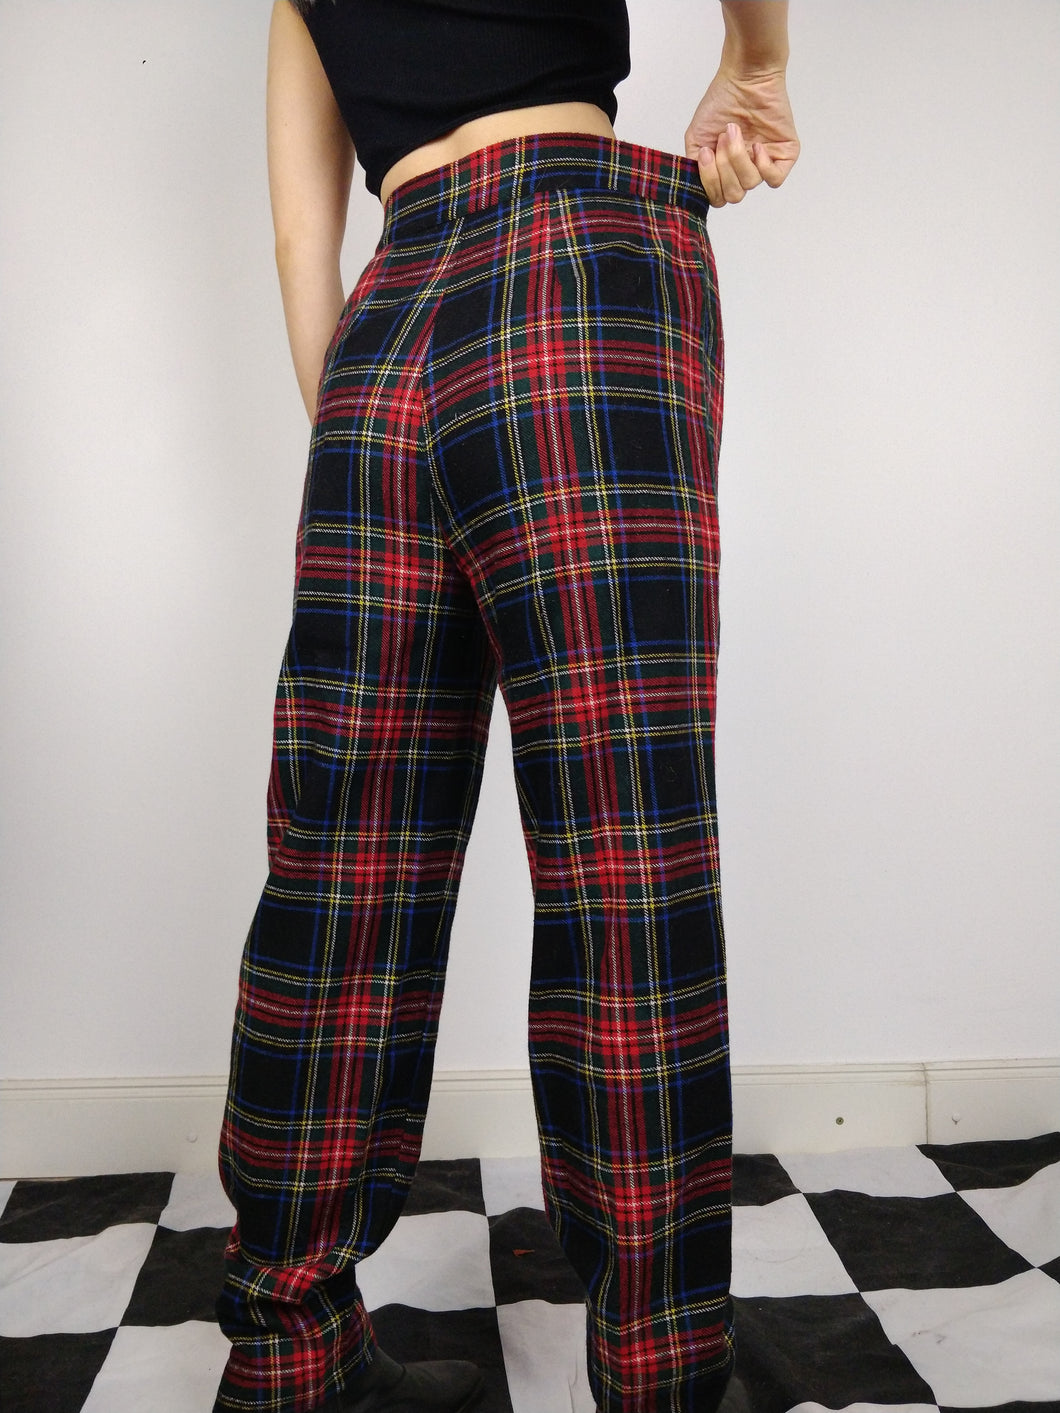 The Red Tartan Pants | Vintage wool plaid checkered pattern high waist red black winter long trouser S